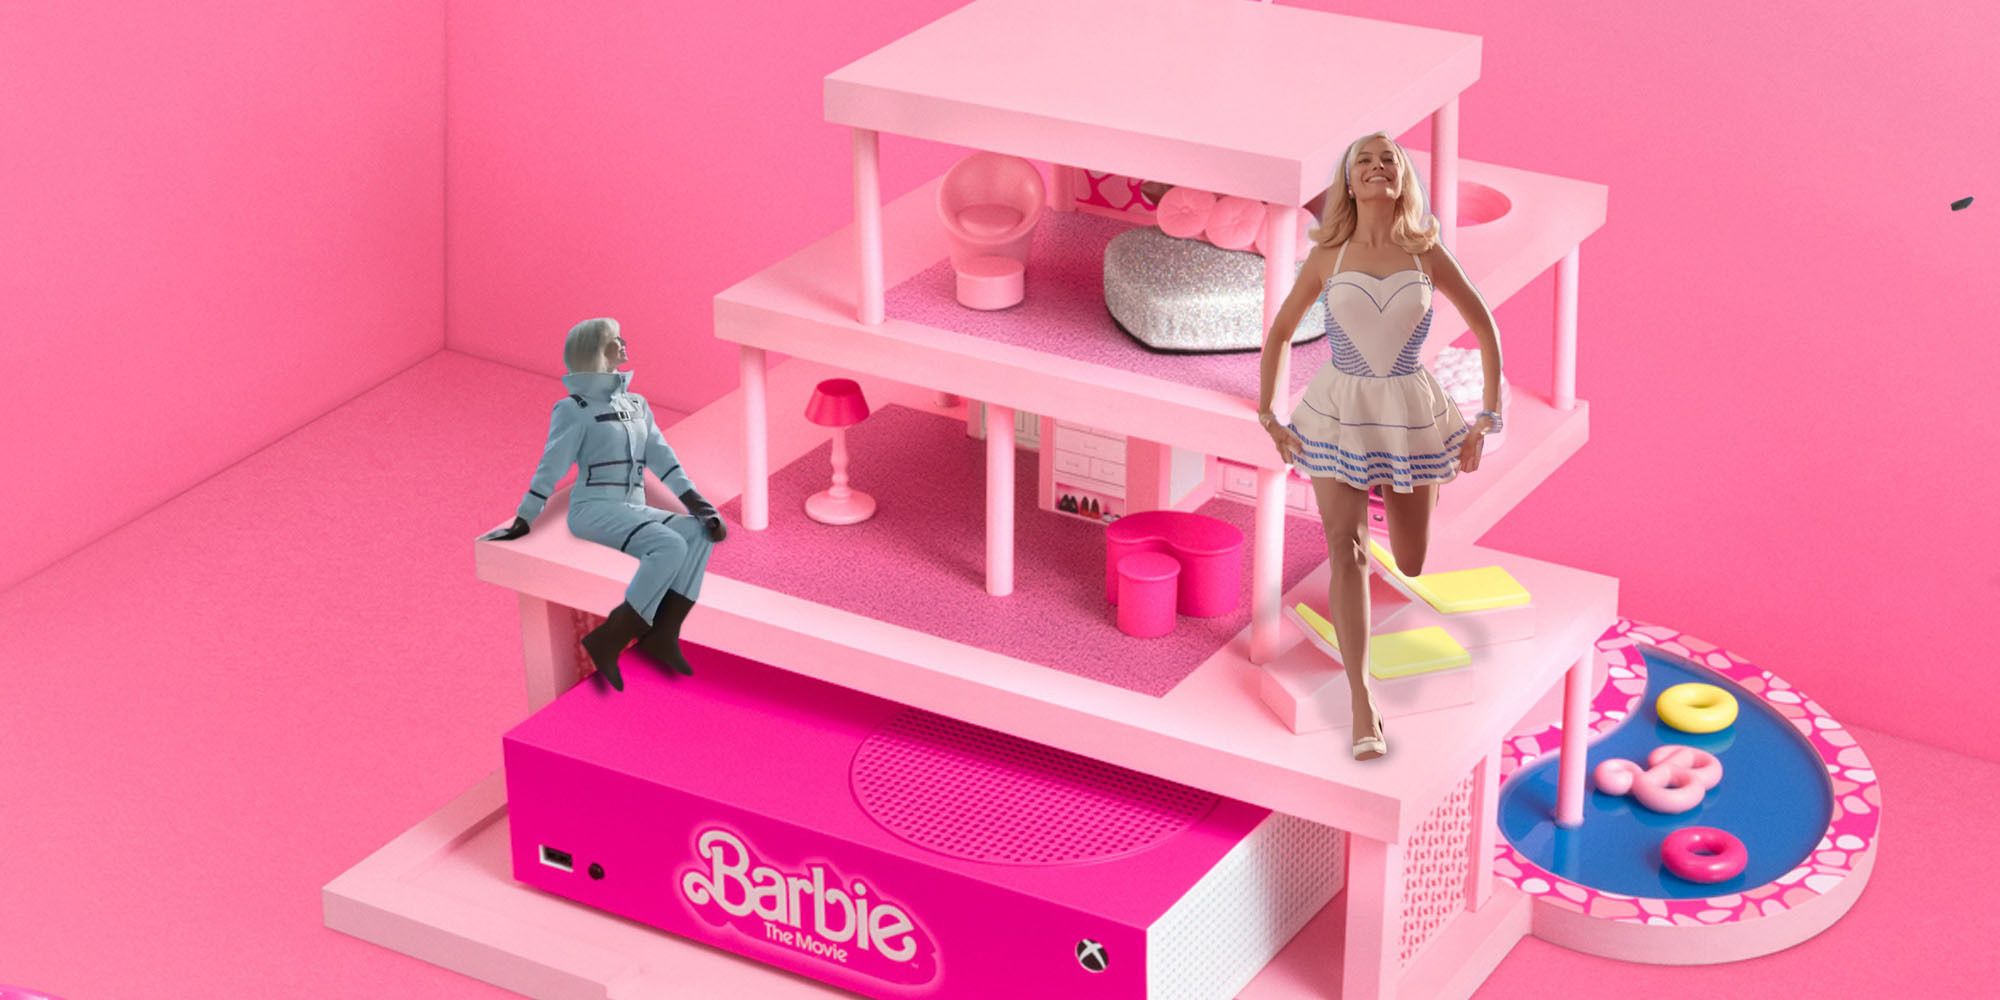 The Barbie Xbox And Controllers Are A Stroke Of Marketing Genius